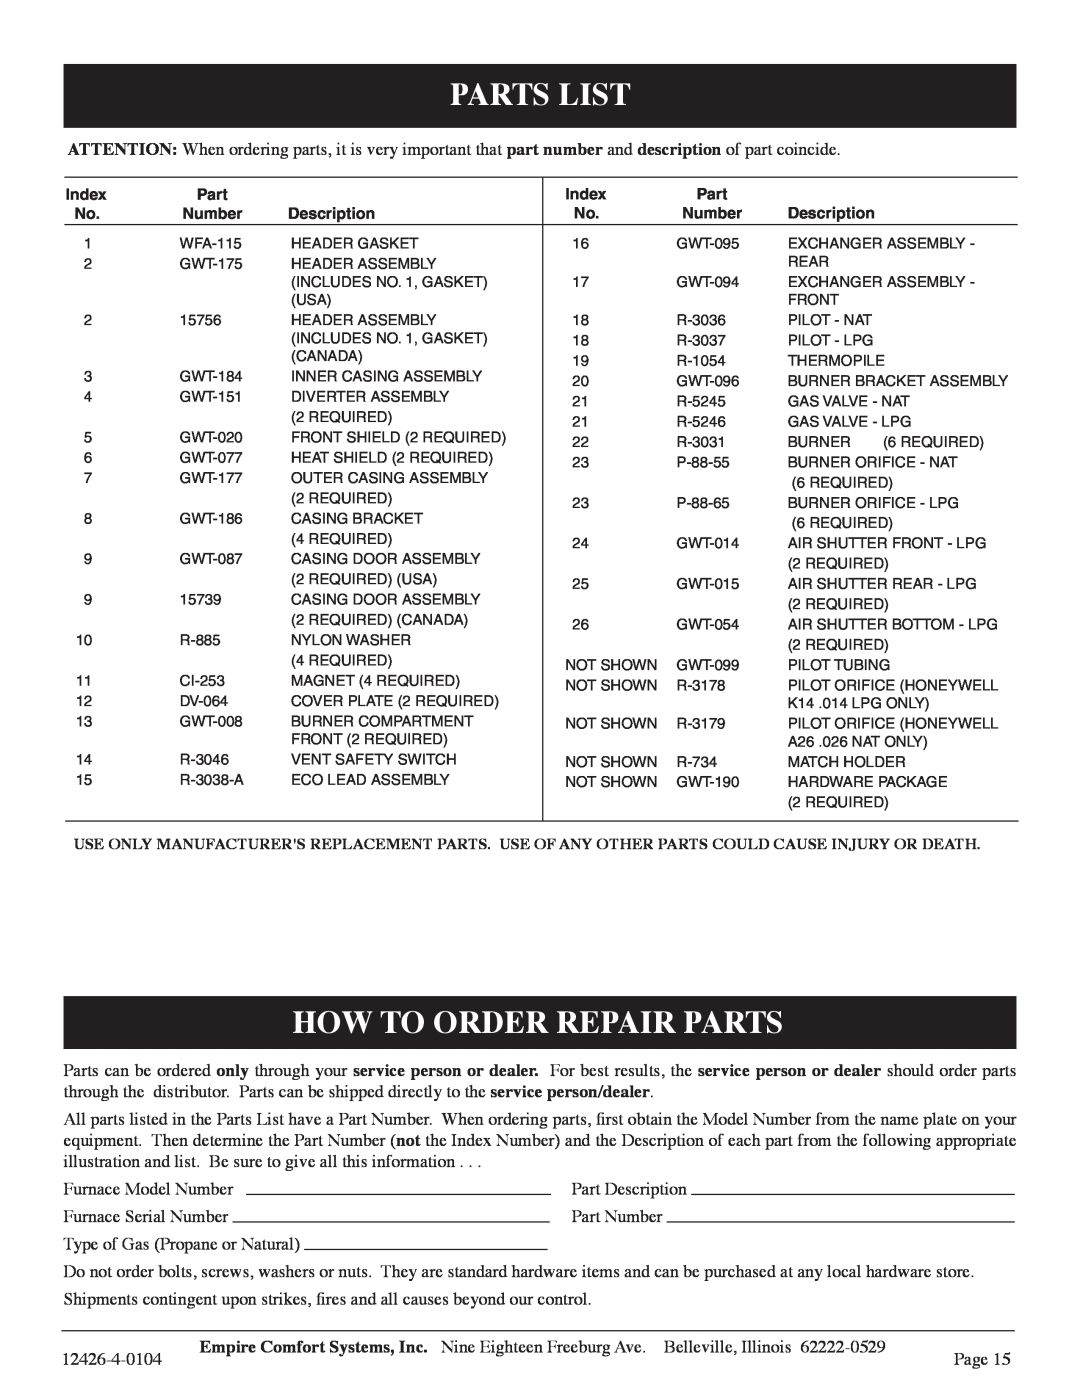 Empire Comfort Systems RB), GWT-50-2 installation instructions Parts List, How To Order Repair Parts 